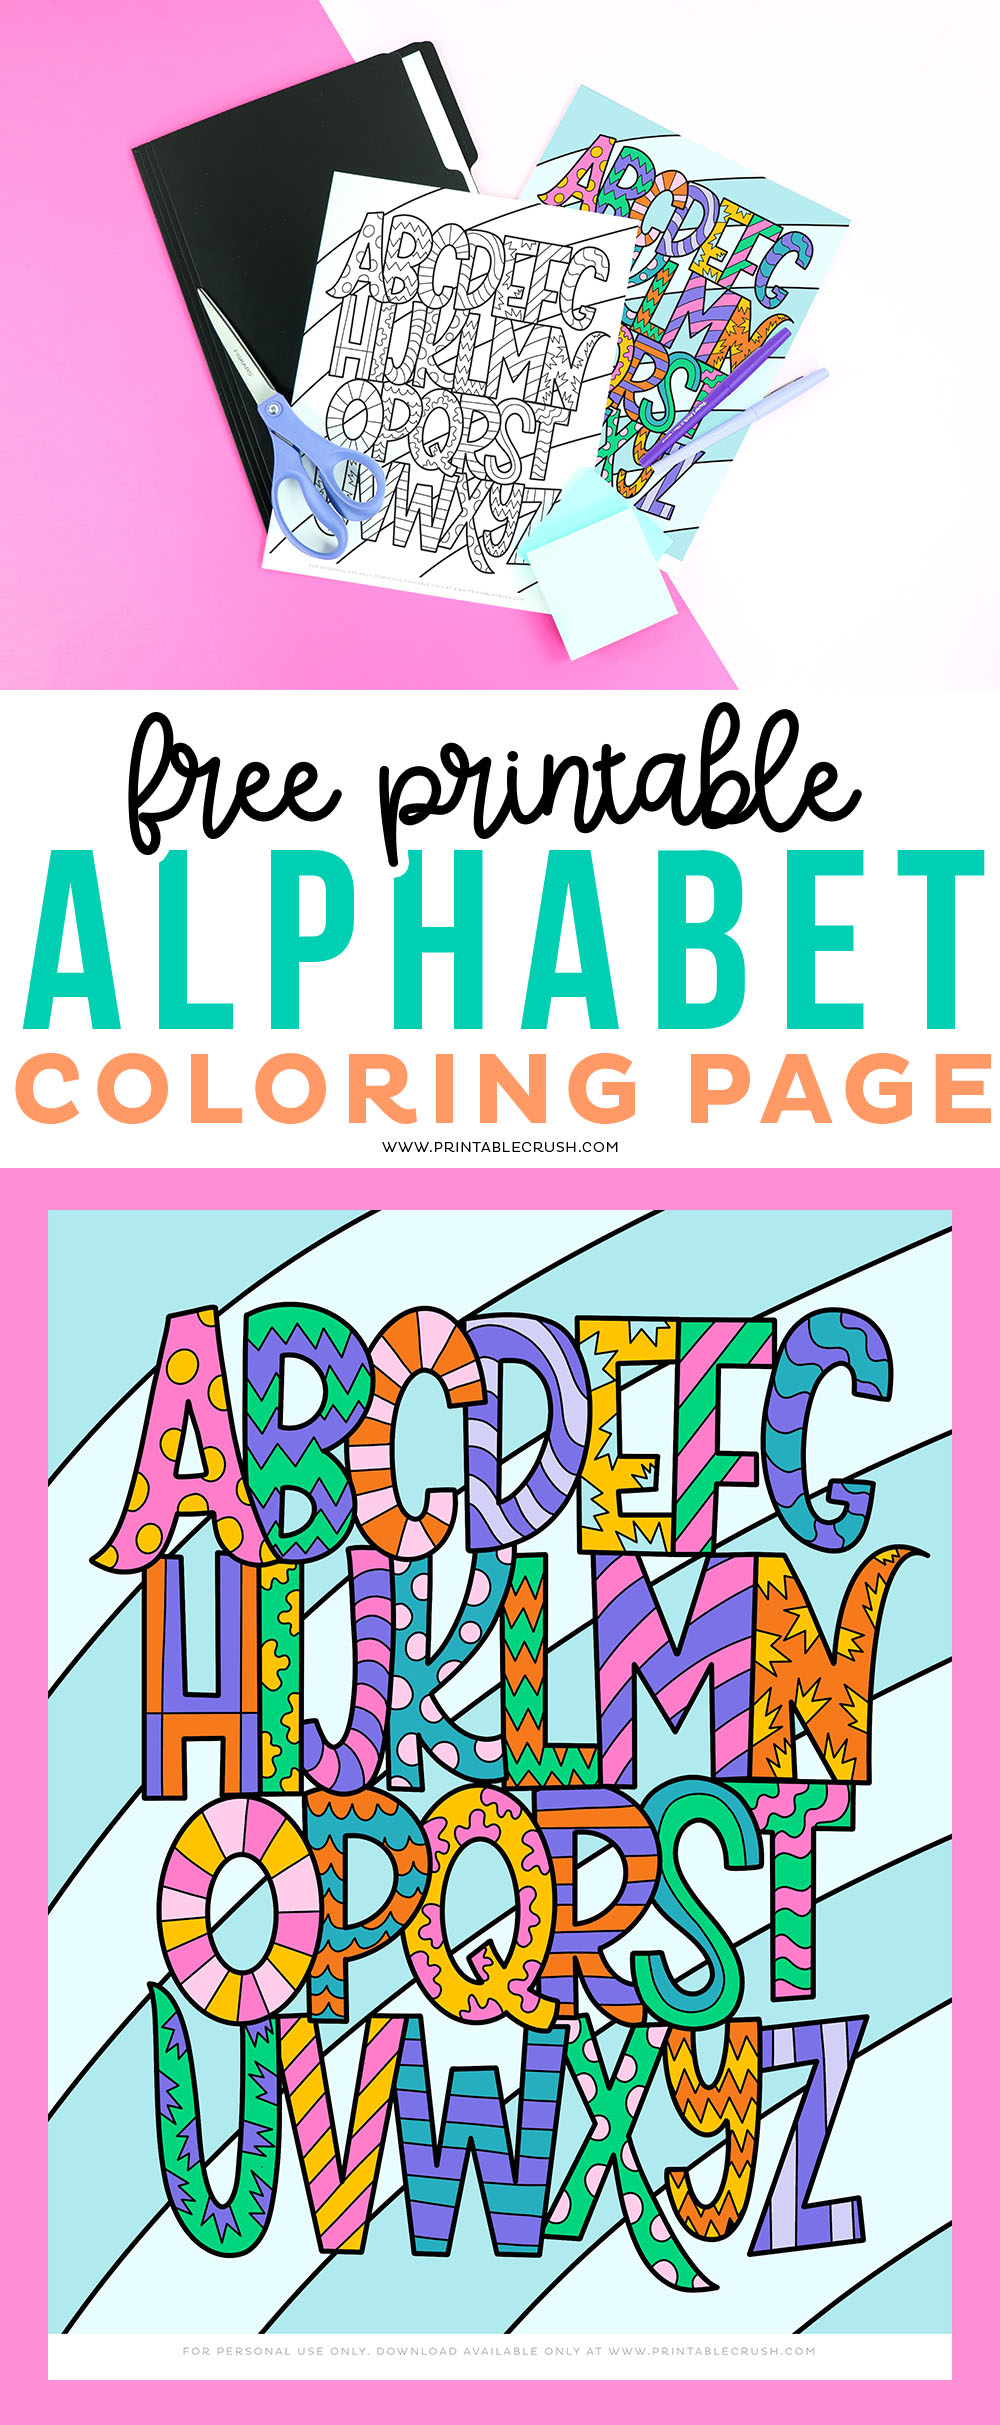 Free printable alphabet coloring page